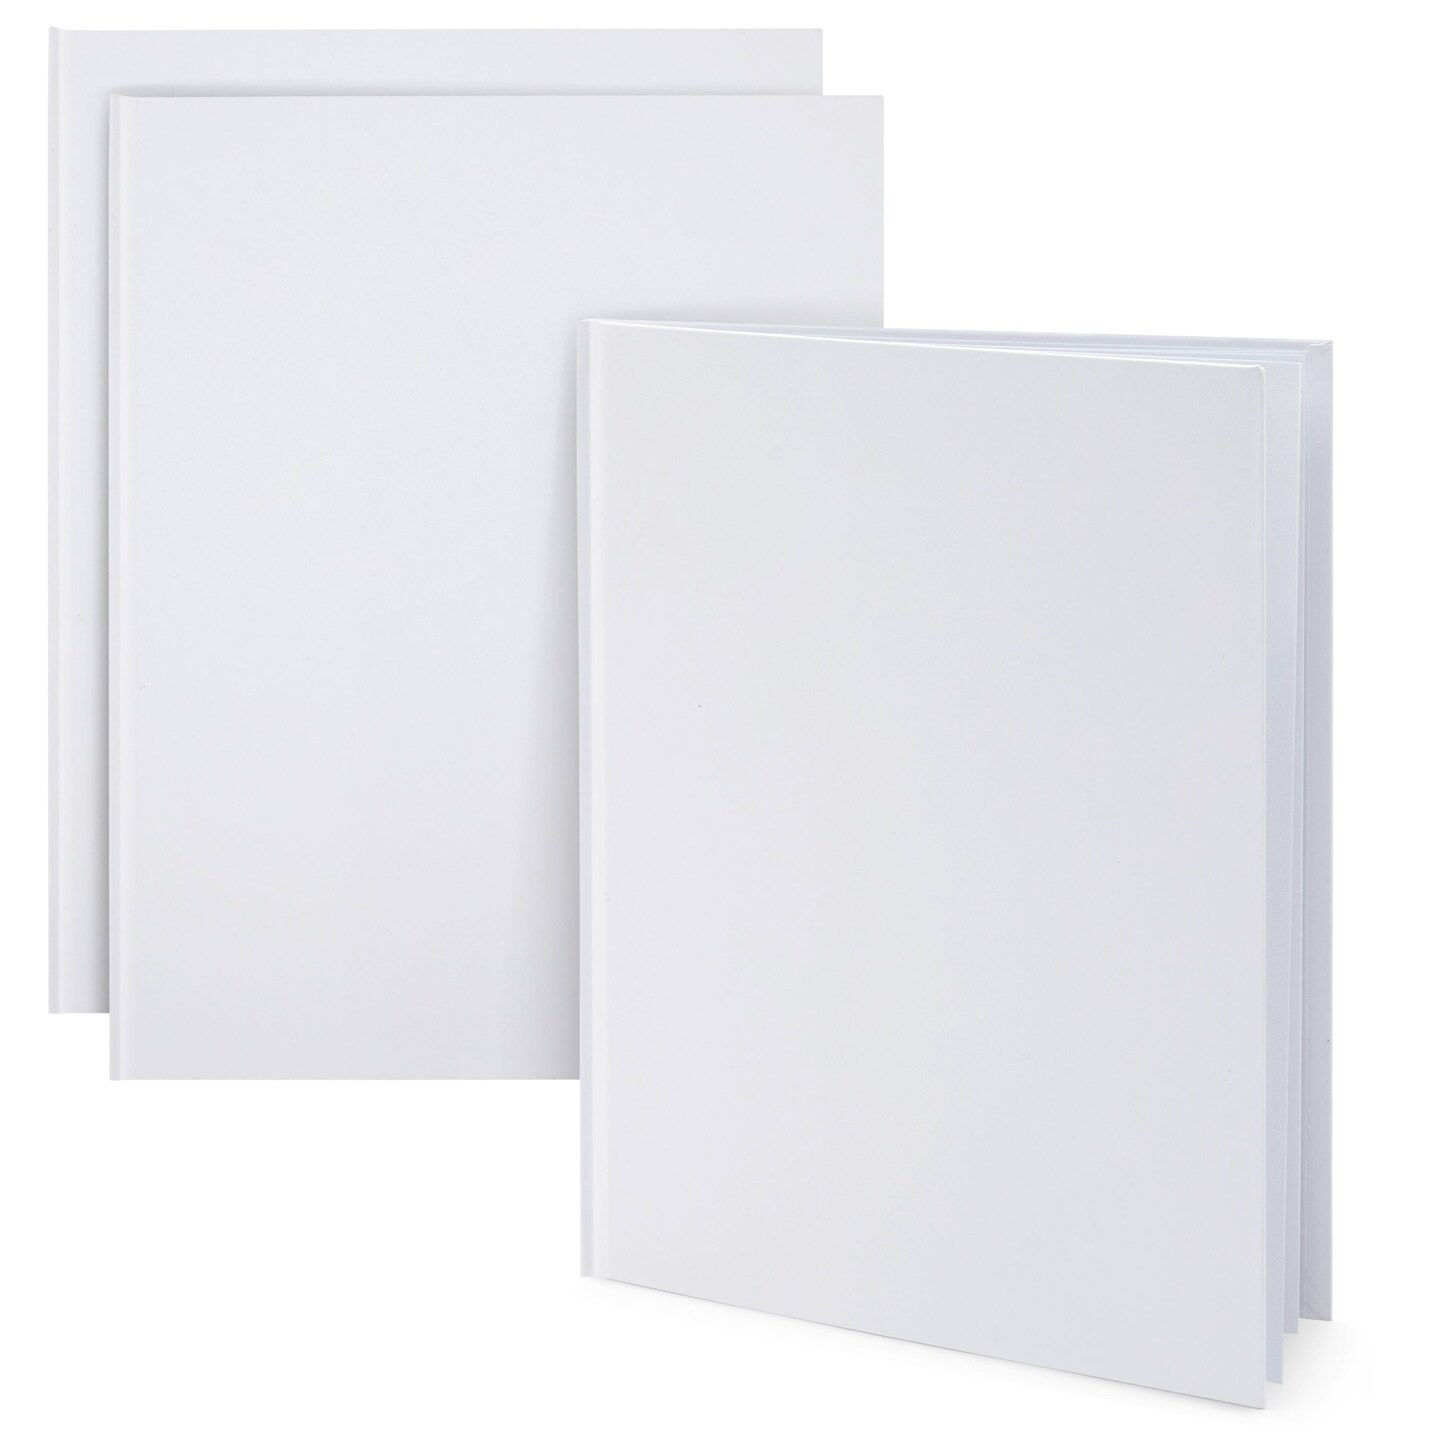 Paper Junkie White Hardcover Blank Books for Kids to Write Stories